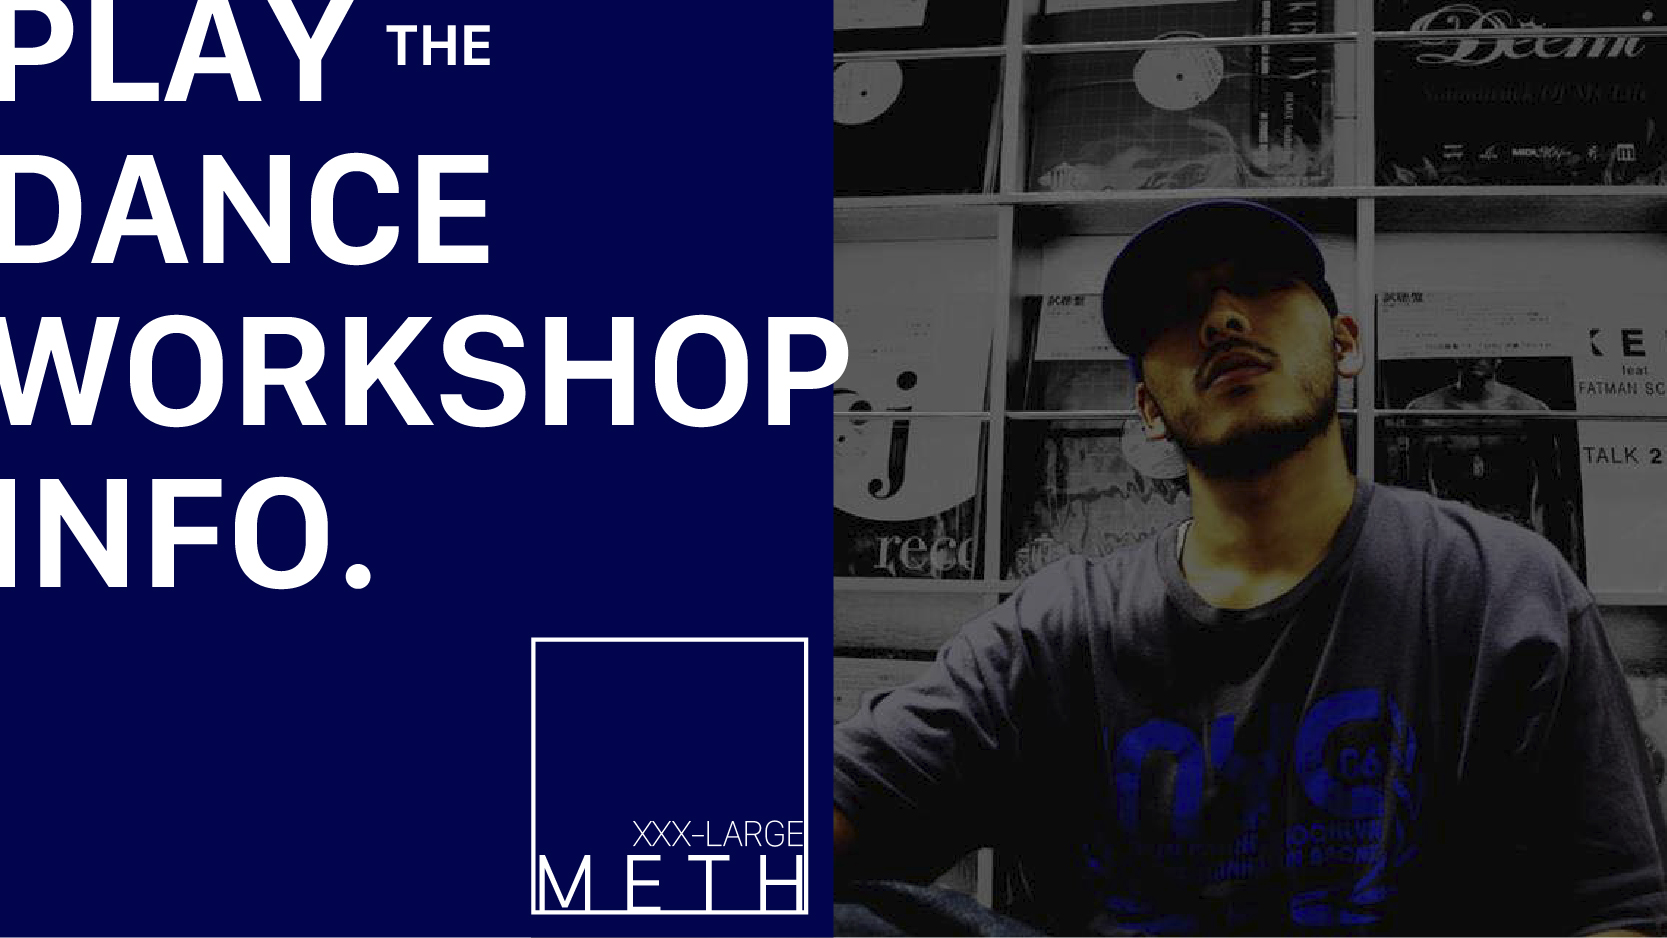 METH from XXX-LARGE WORKSHOP